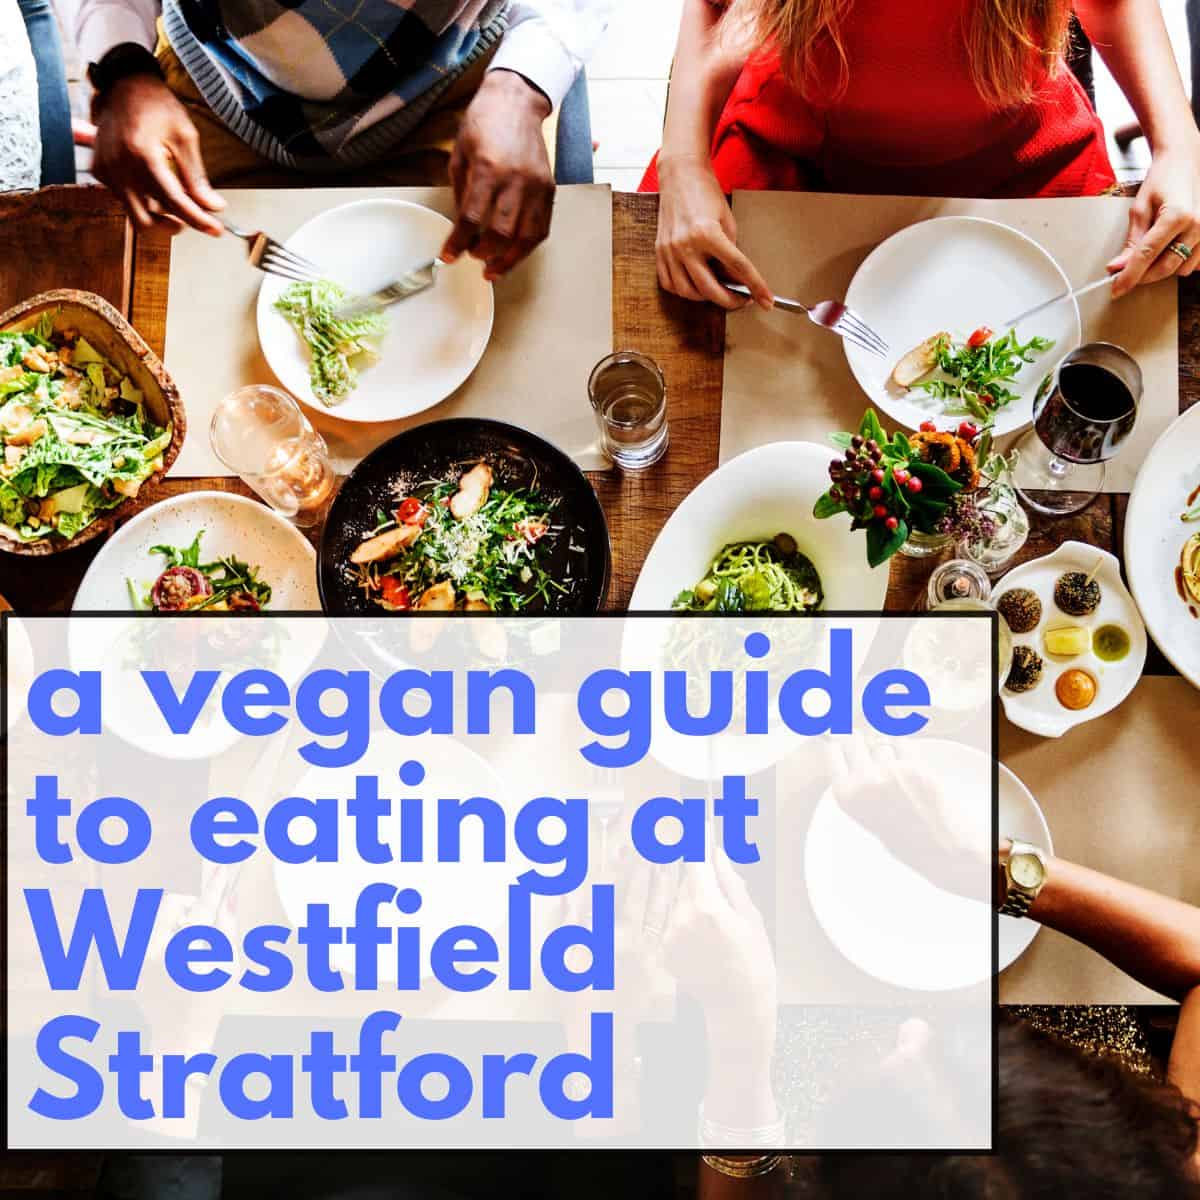 Vegan Food Options at Westfield Shopping Centre, Stratford